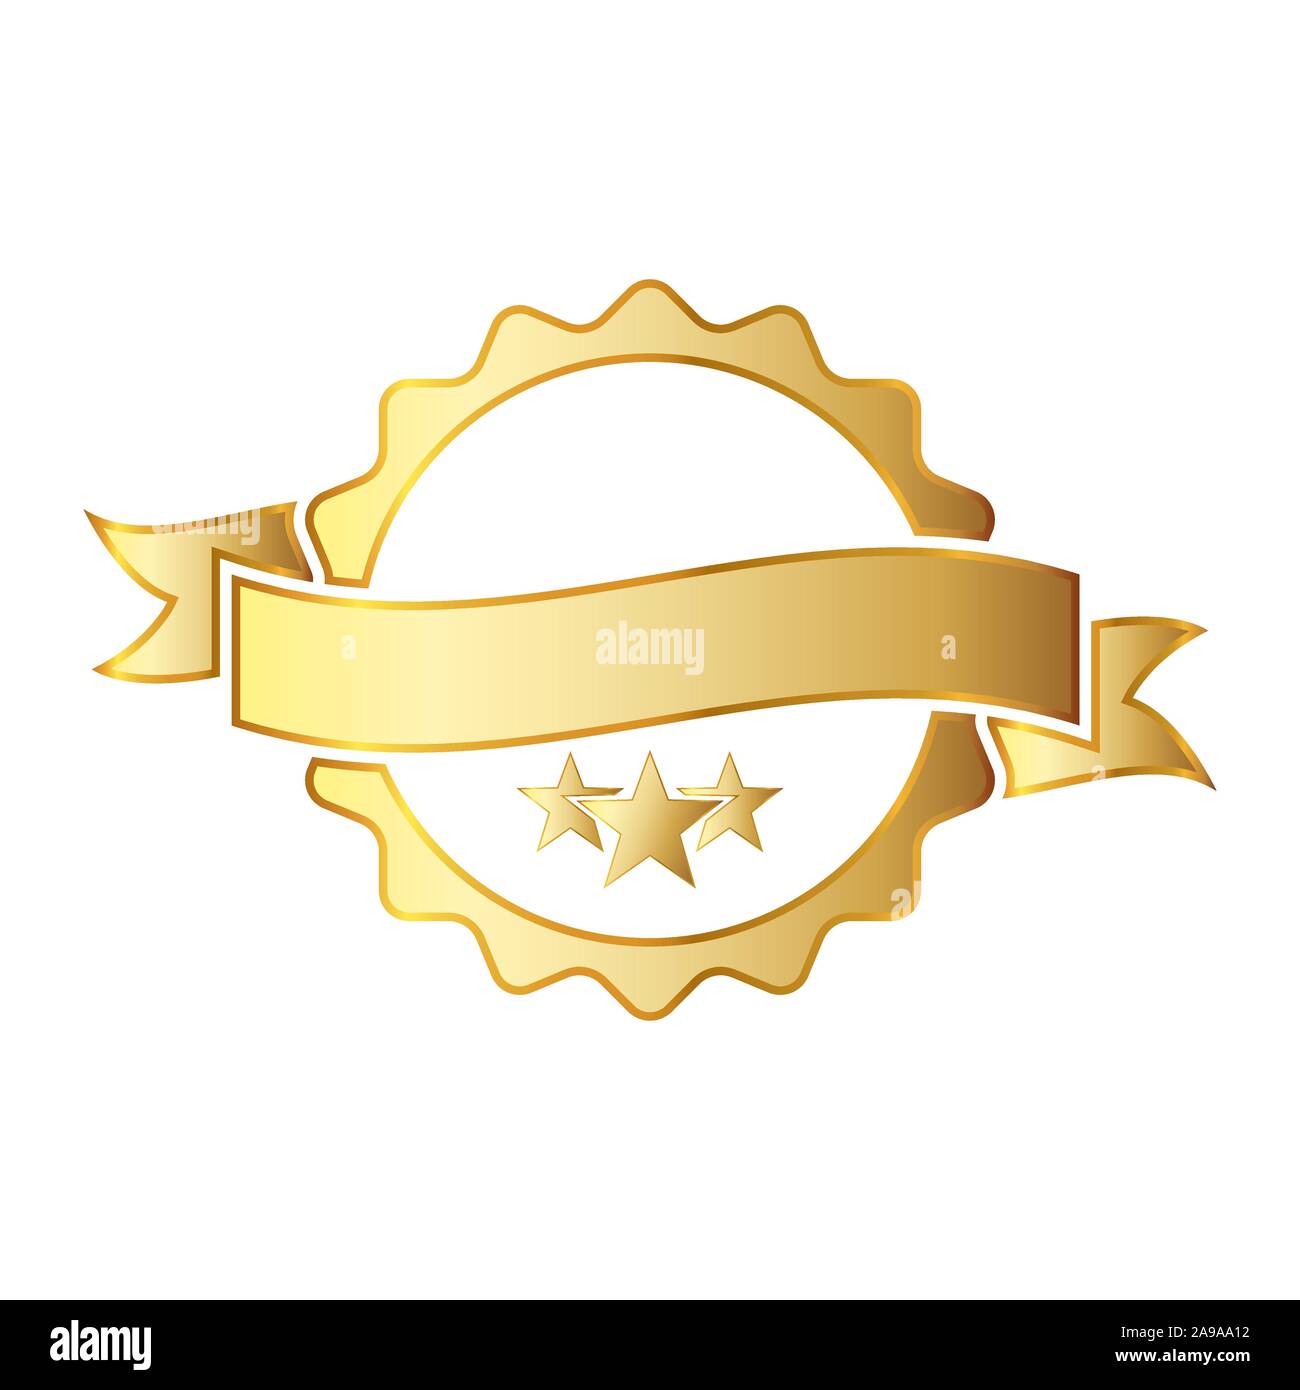 Golden award icon with ribbon. Abstract golden medal isolated on white background. Silhouette of trophy, awards or medal. Vector illustration. Stock Vector